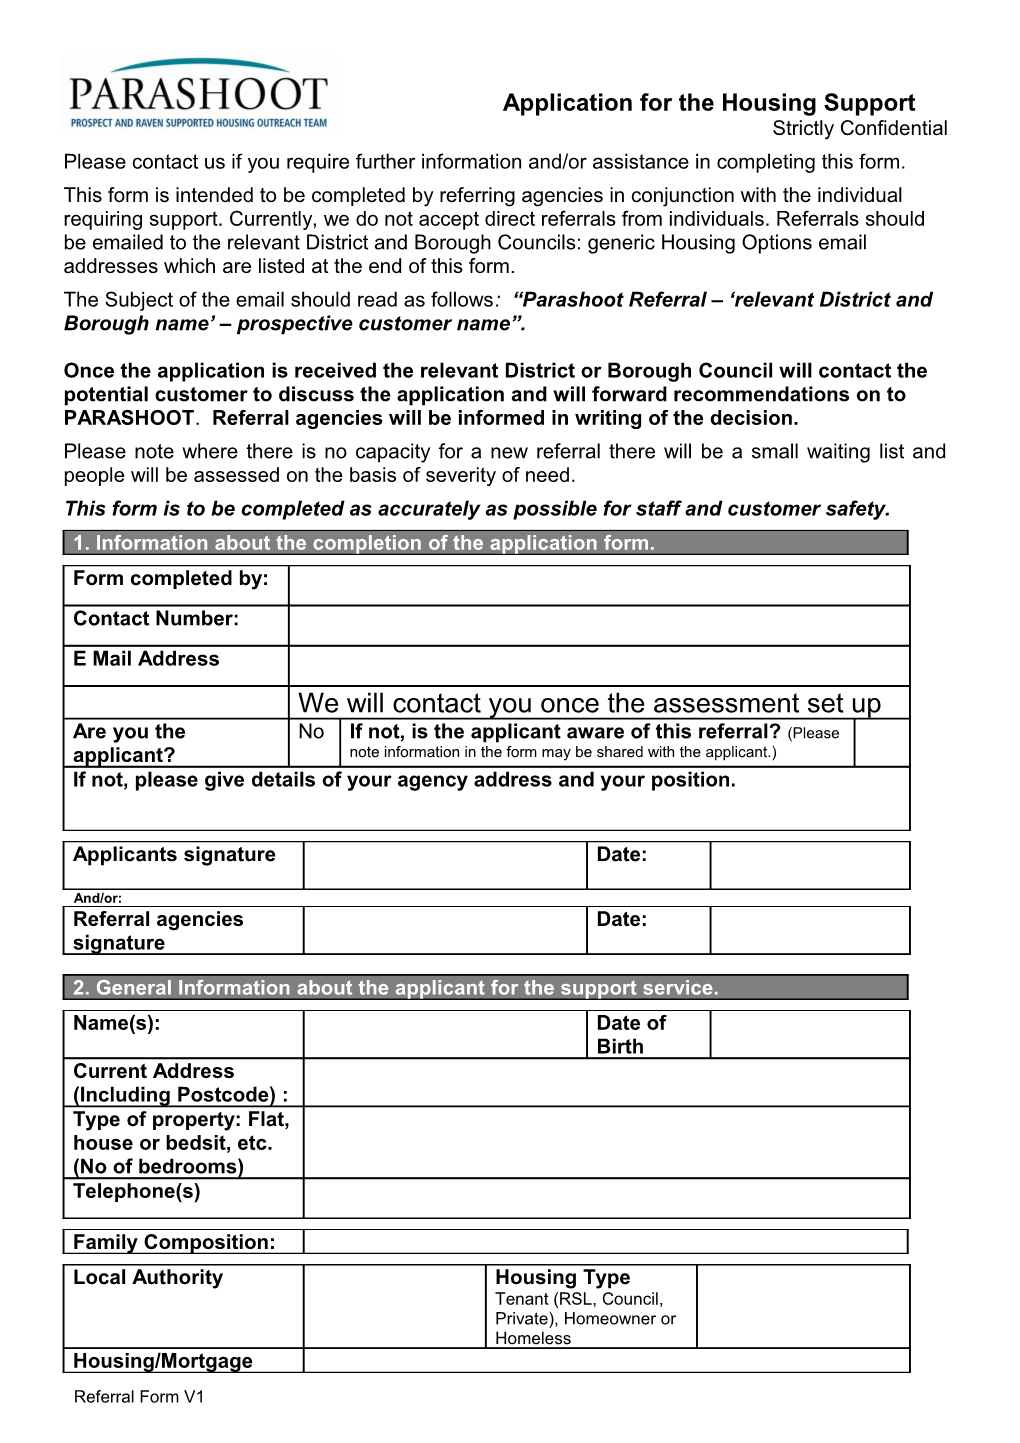 Please Contact Us If You Require Further Information And/Or Assistance in Completing This Form